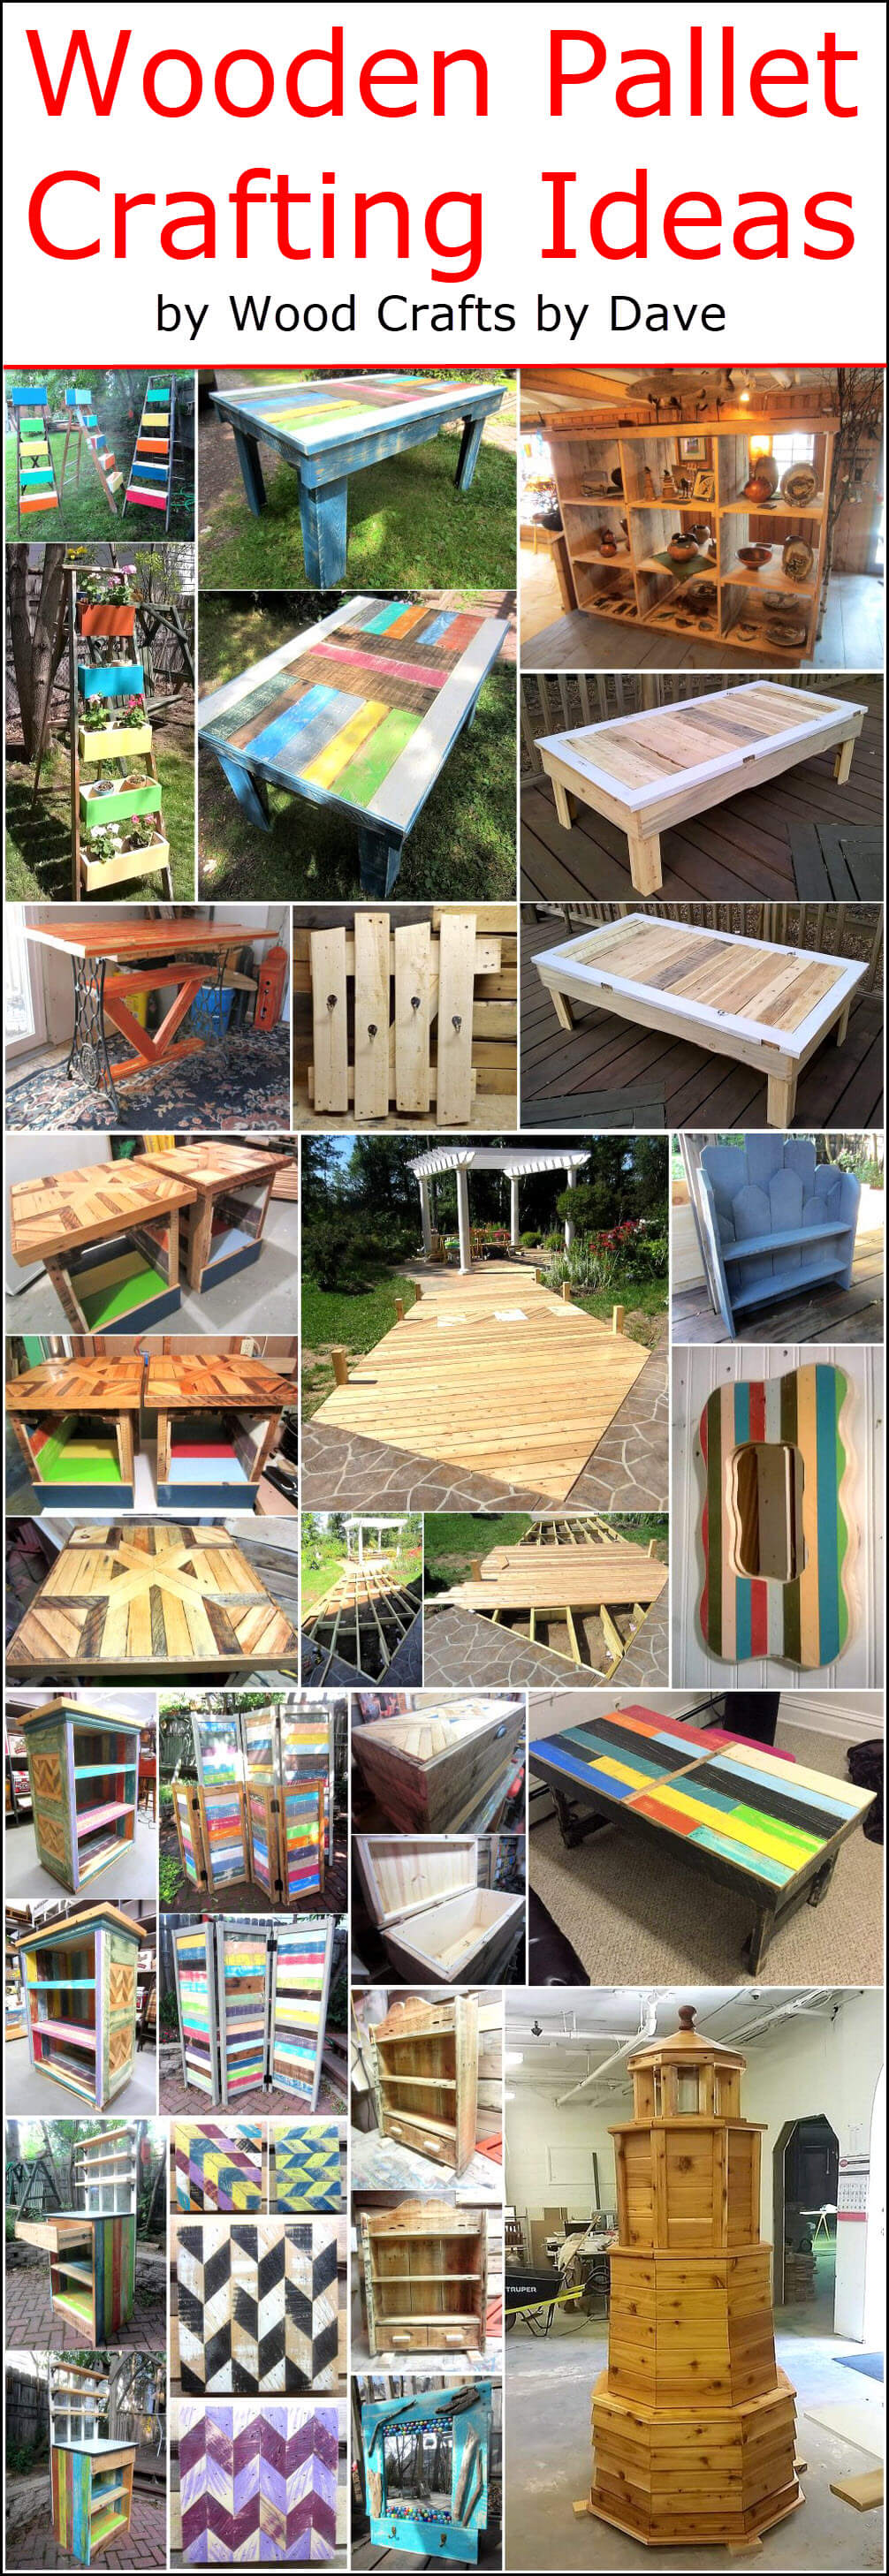 Wood Pallet Crafting Ideas